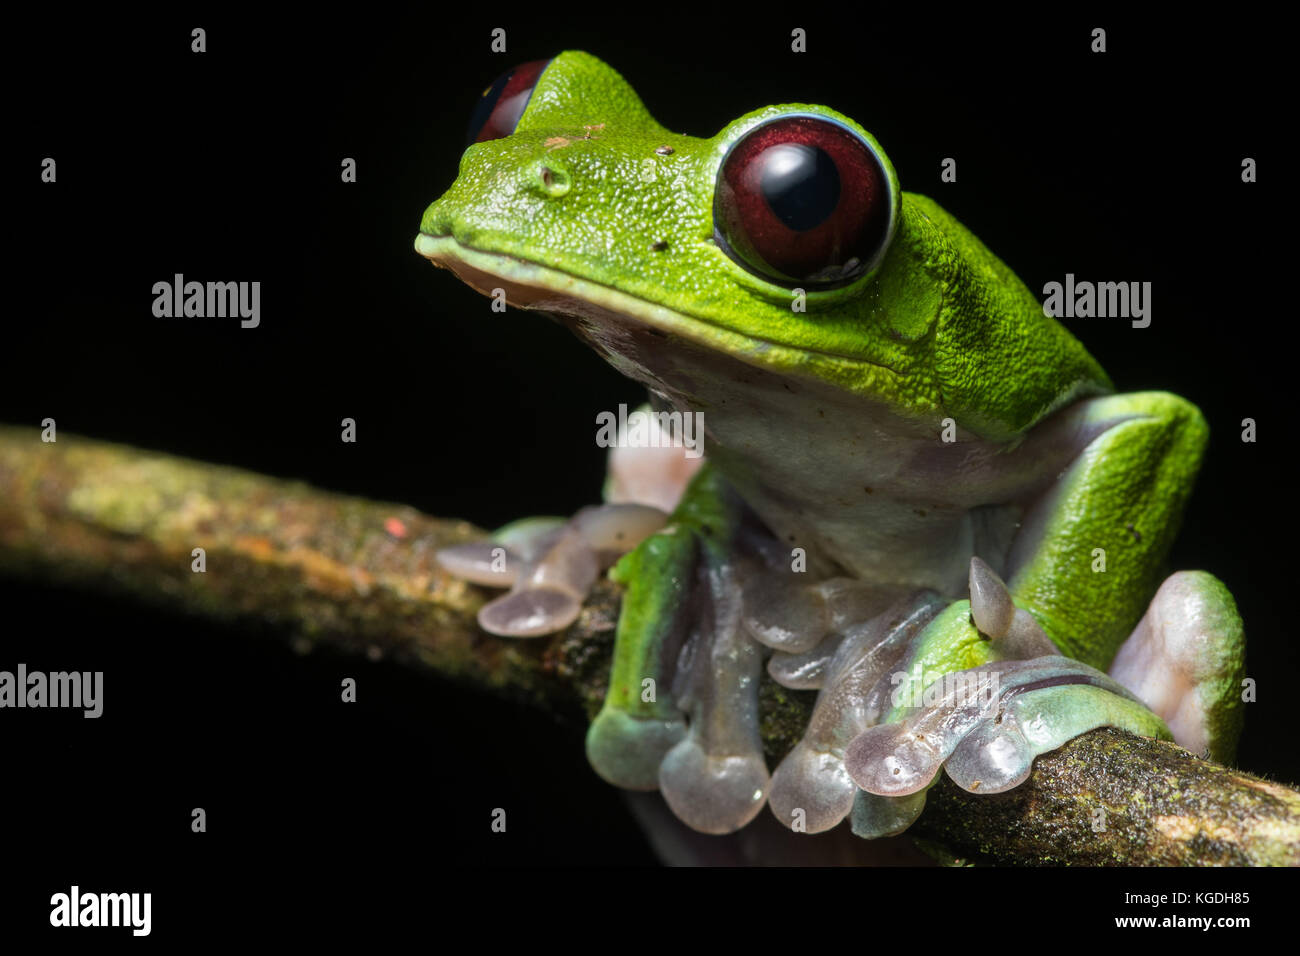 A gliding leaf frog (Agalychnis spurrelli) from the jungle of Ecuador. A rare frog to see and not to be confused with the related red eyed tree frog. Stock Photo